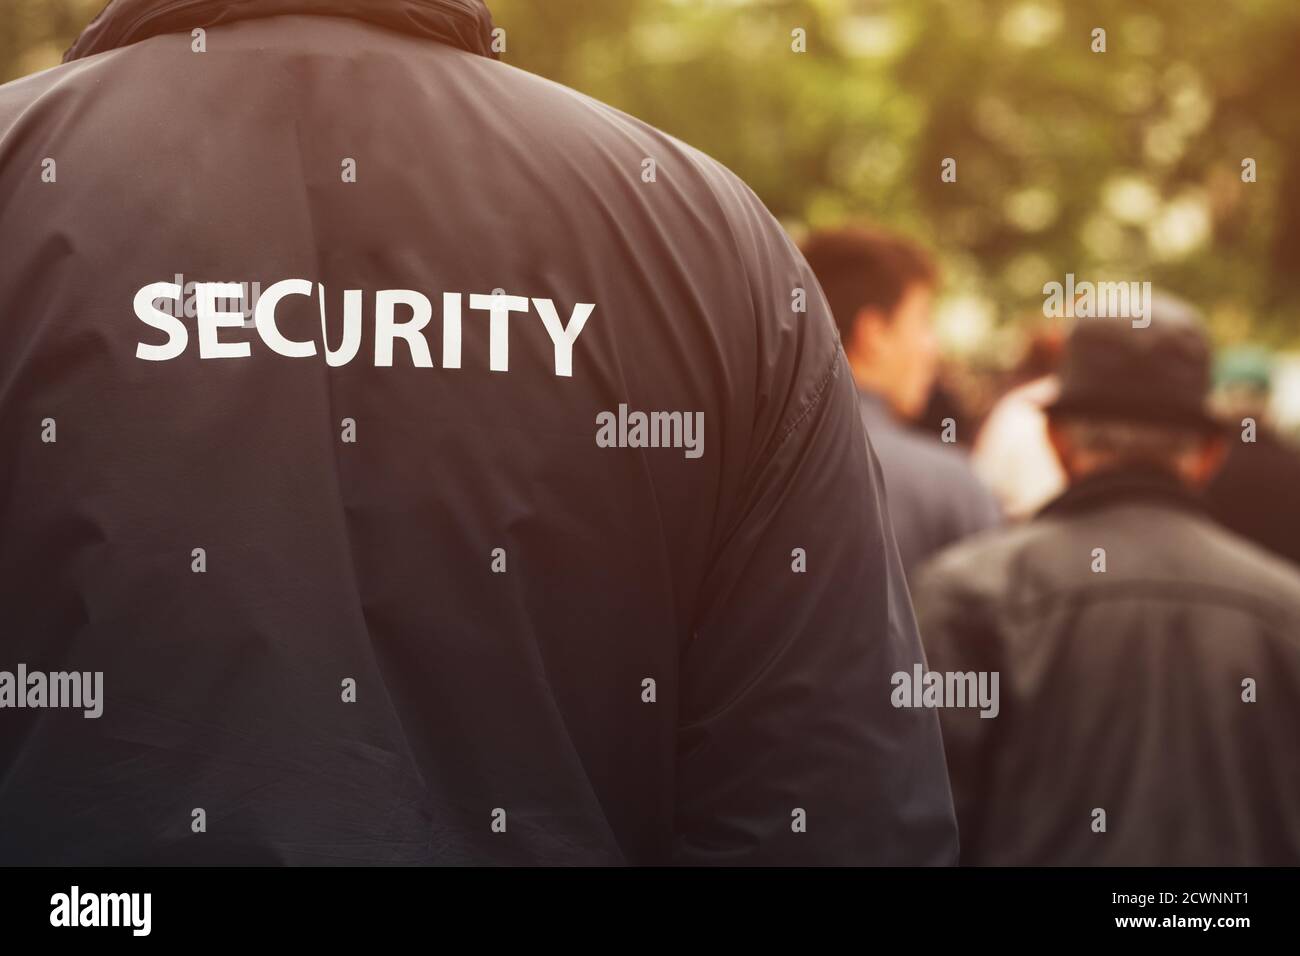 Gate guard security officer on public event wearing uniform Stock Photo